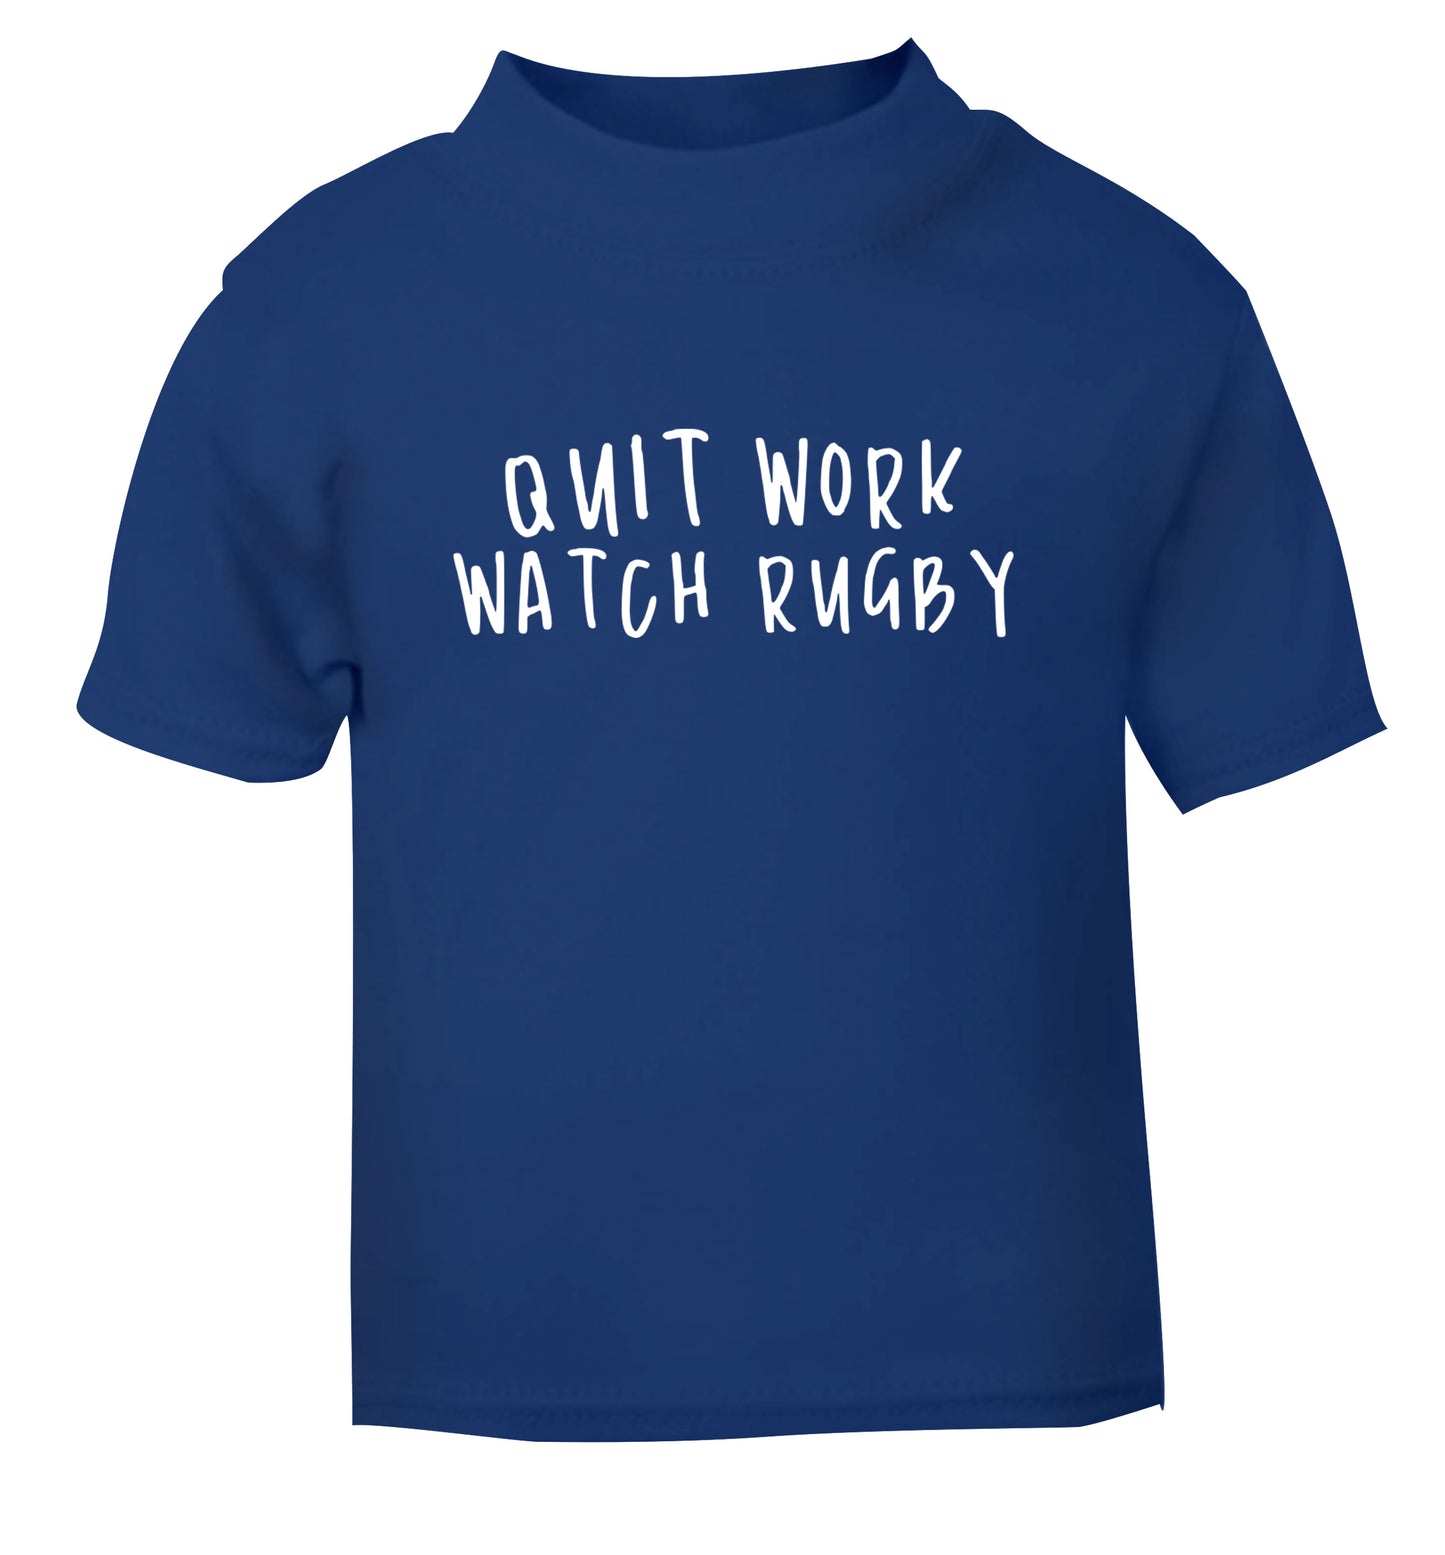 Quit work watch rugby blue Baby Toddler Tshirt 2 Years